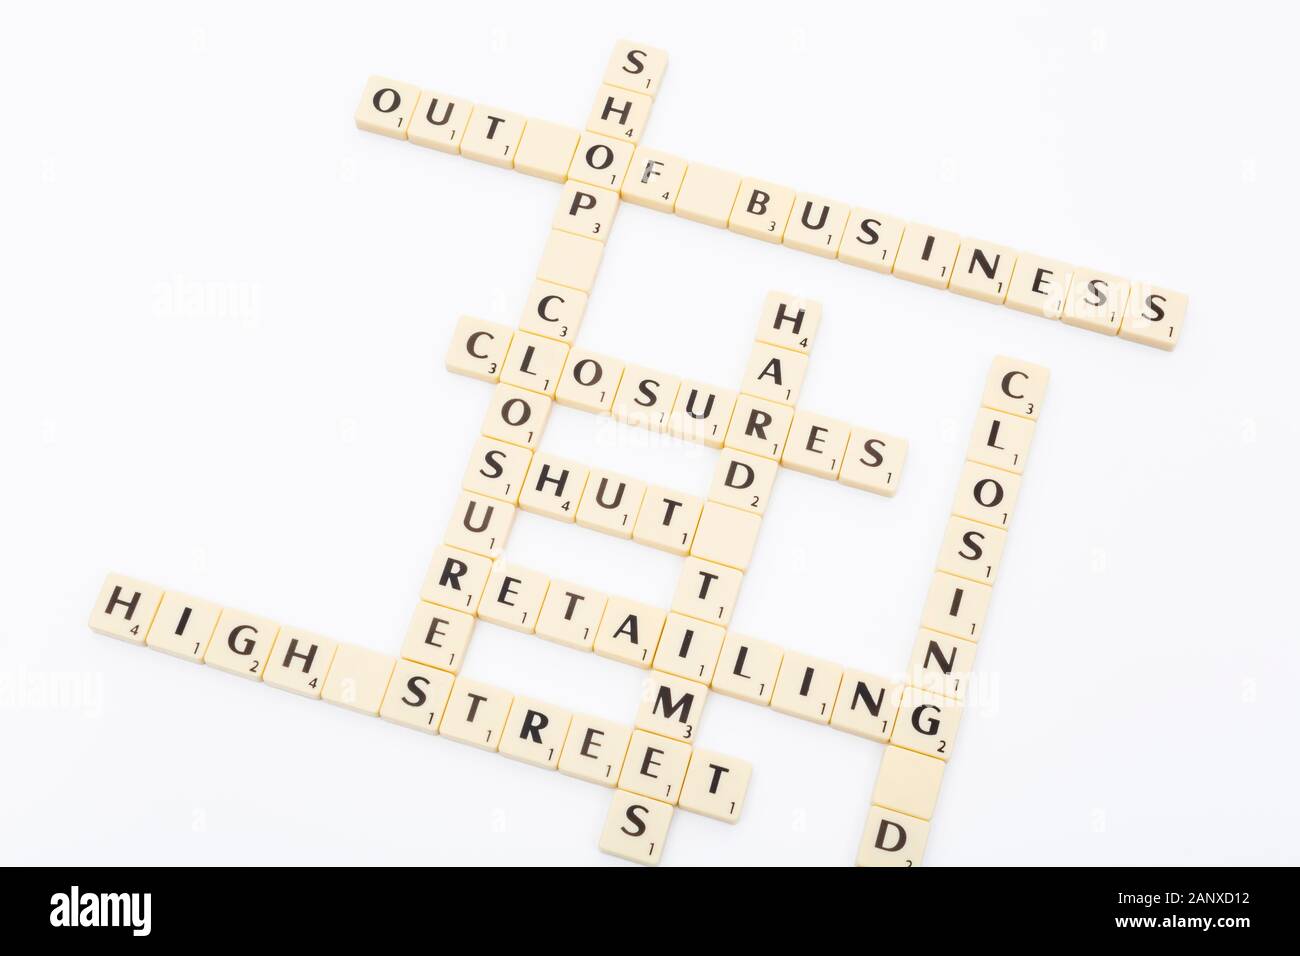 Concept of UK high street crisis / retail crisis in letter tiles / words. Closing down, shop closures, out of business, shops shut, retail closures. Stock Photo